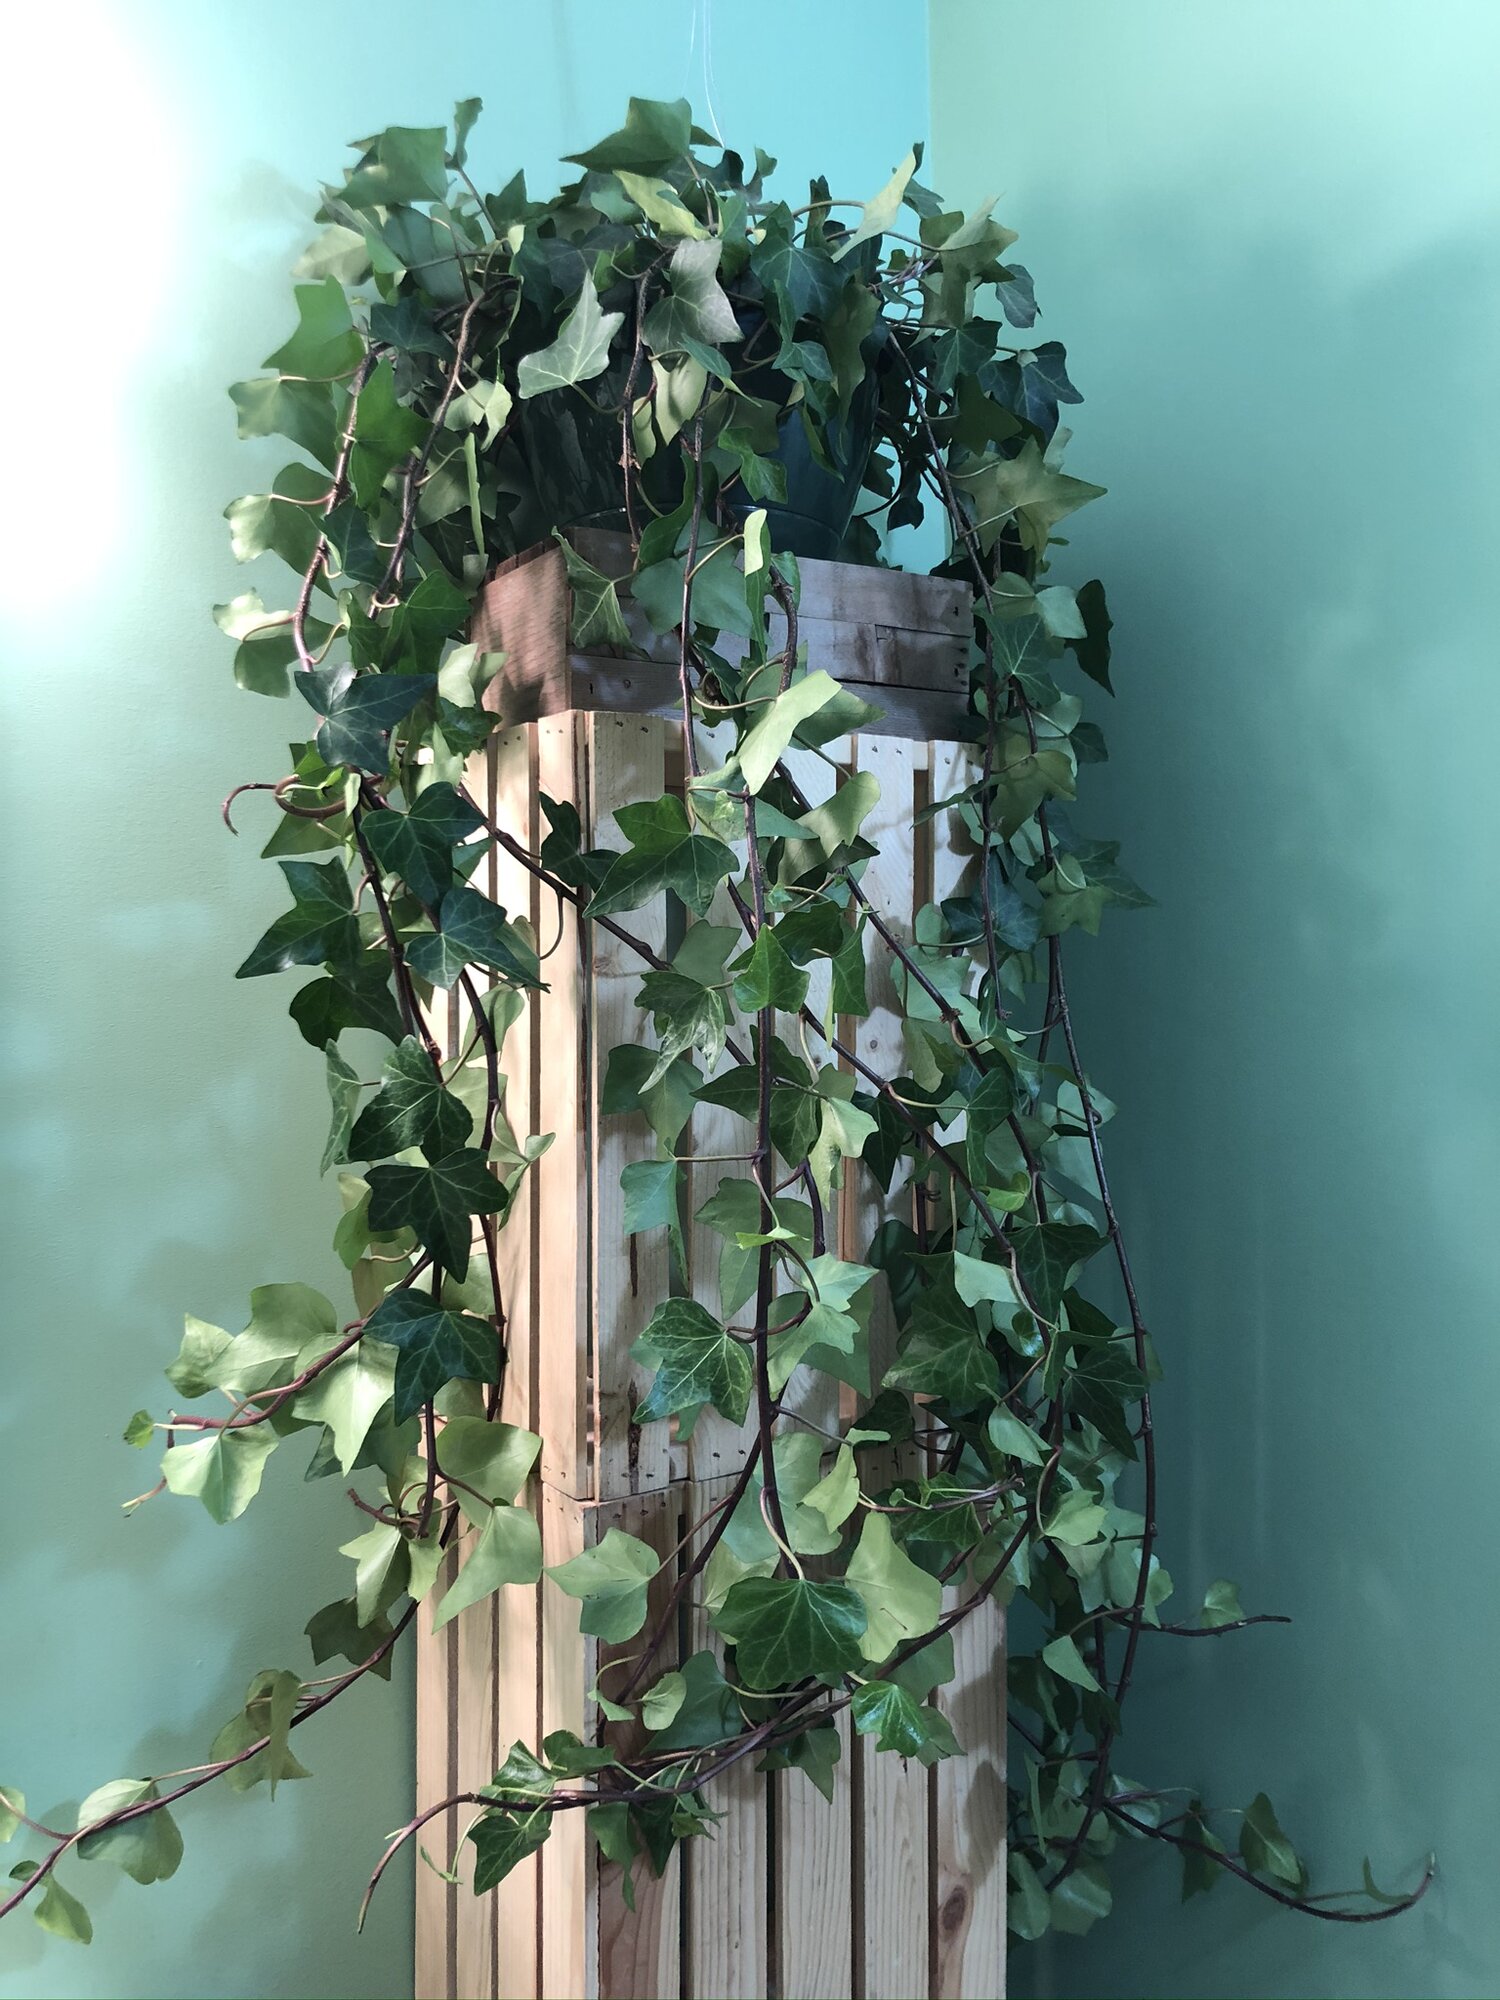 This droolworthy ivy has such great character!! A perfect addition to your houseplant collection, just don’t let pets and children chew on it!